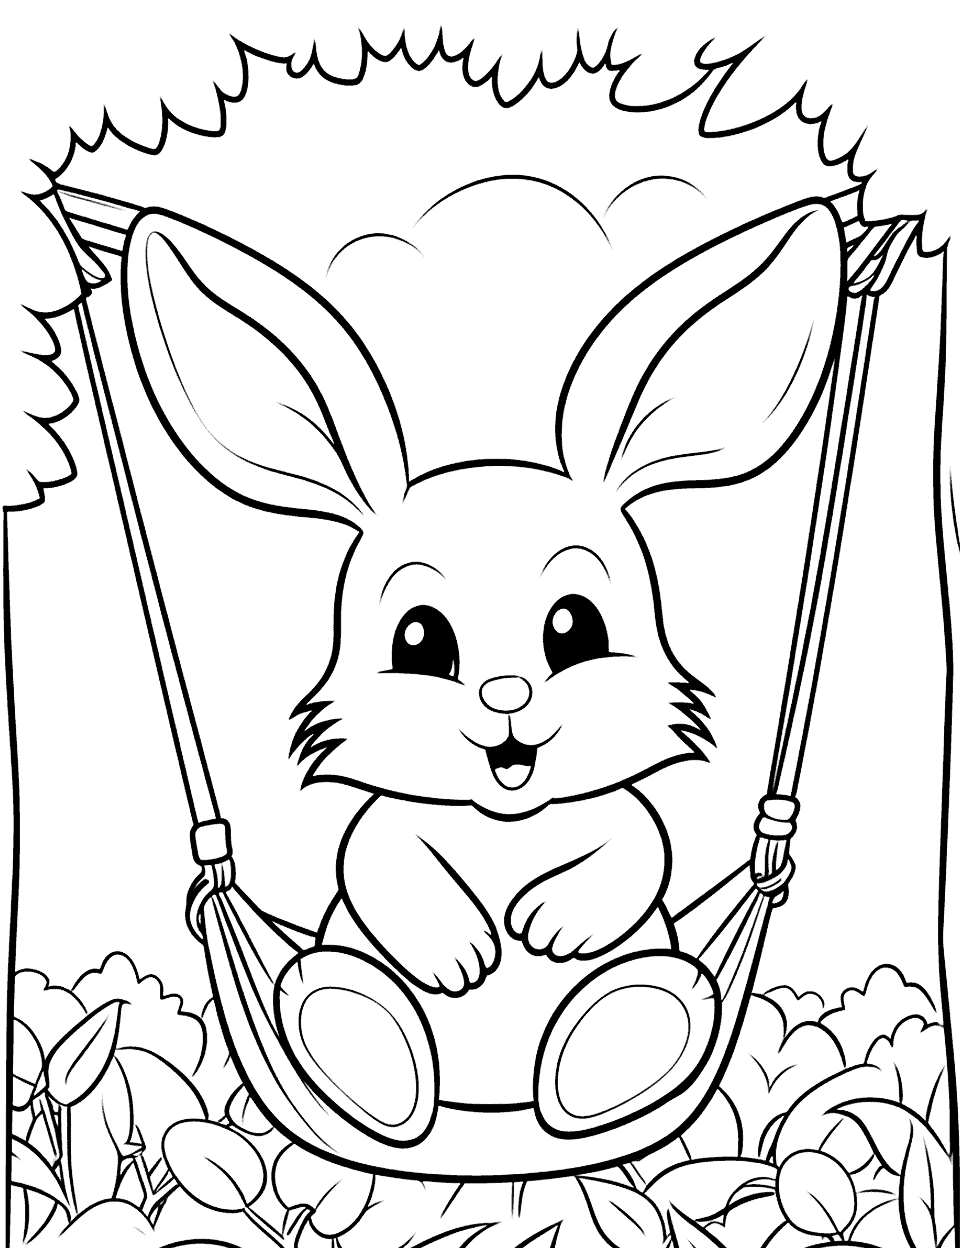 Big Eared Bunny in a Hammock Coloring Page - Resting between two trees, our bunny enjoys a warm summer day.